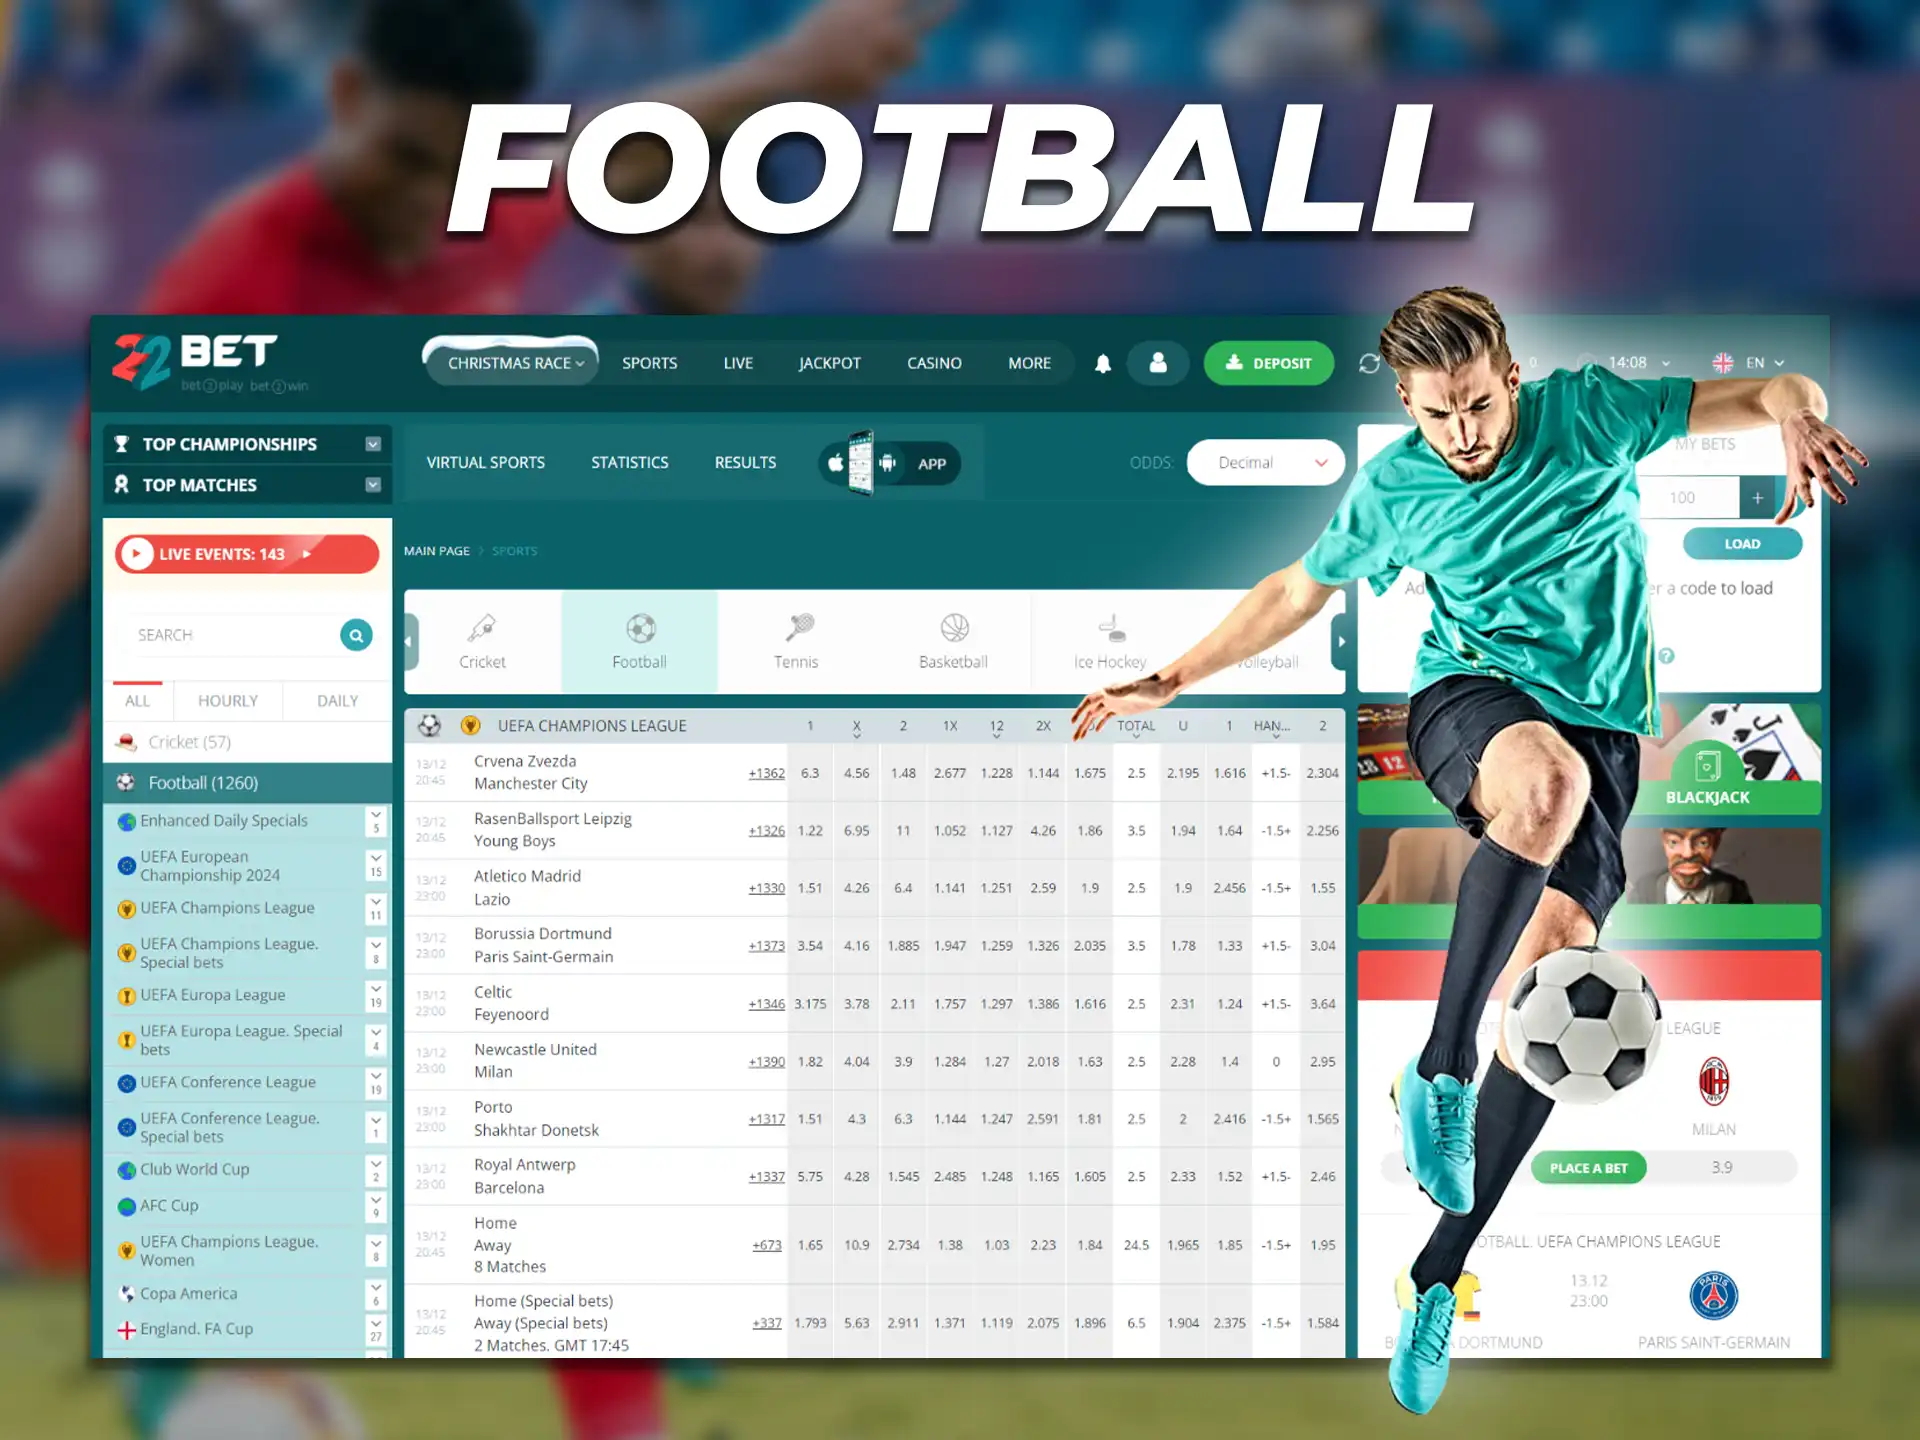 Betting on football and sporting events at 22Bet.